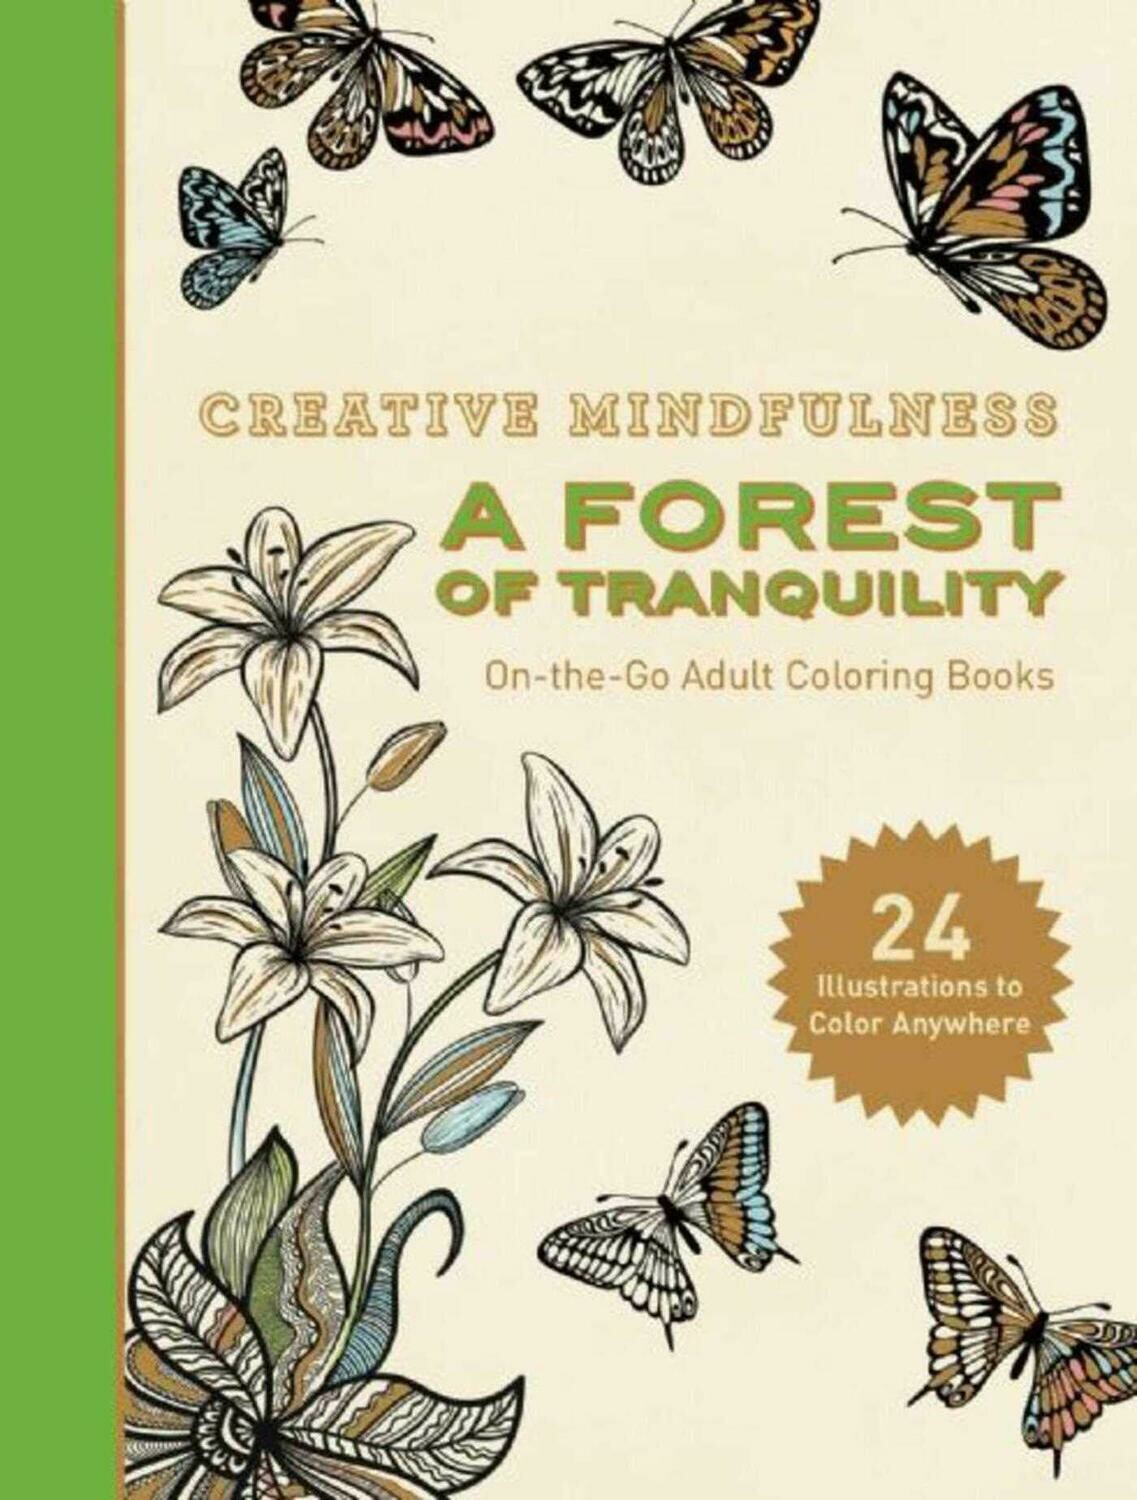 Creative Mindfulness- A Forest of Tranquility Coloring Book